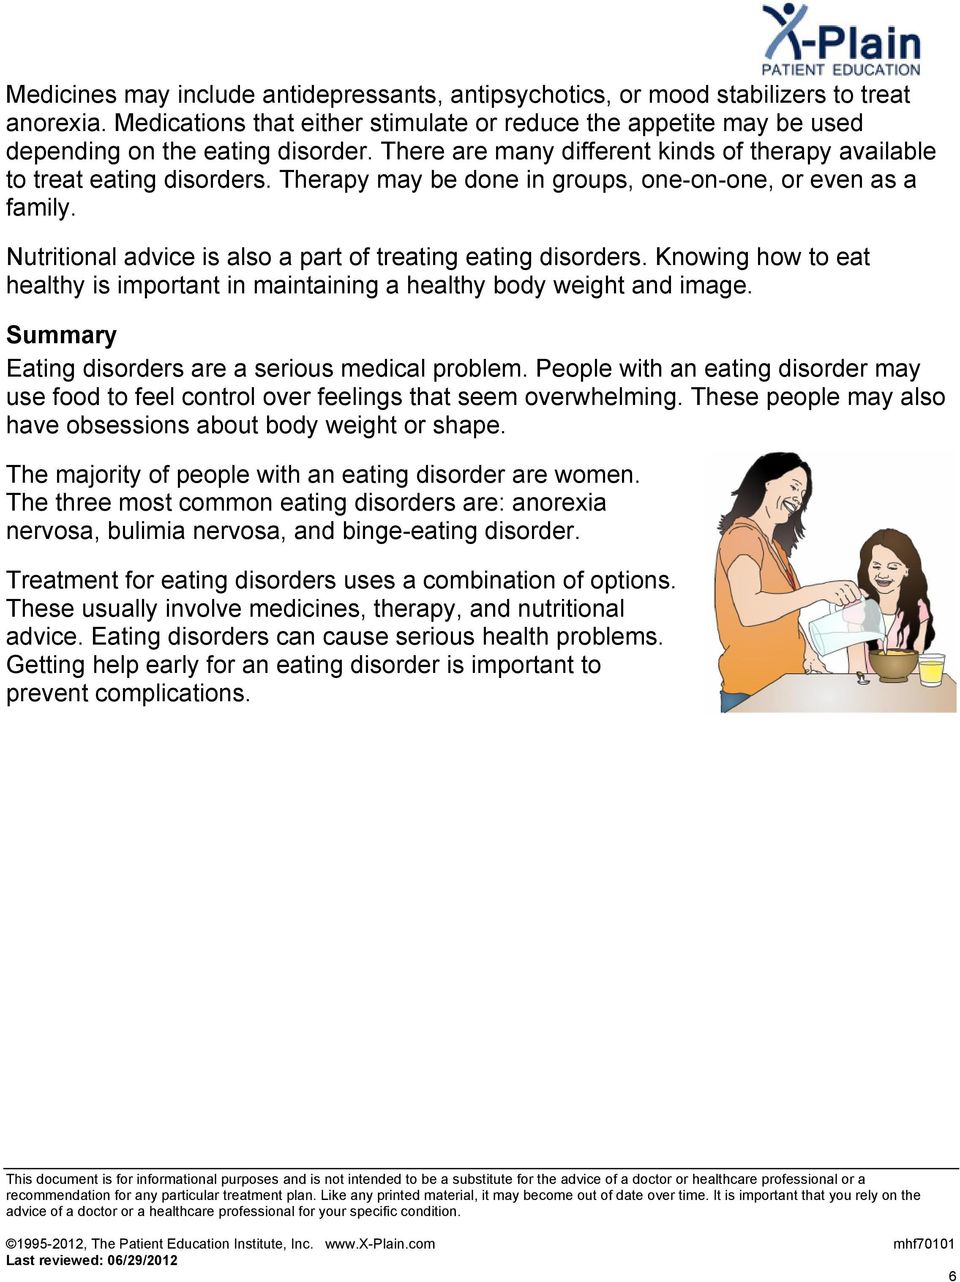 Nutritional advice is also a part of treating eating disorders. Knowing how to eat healthy is important in maintaining a healthy body weight and image.